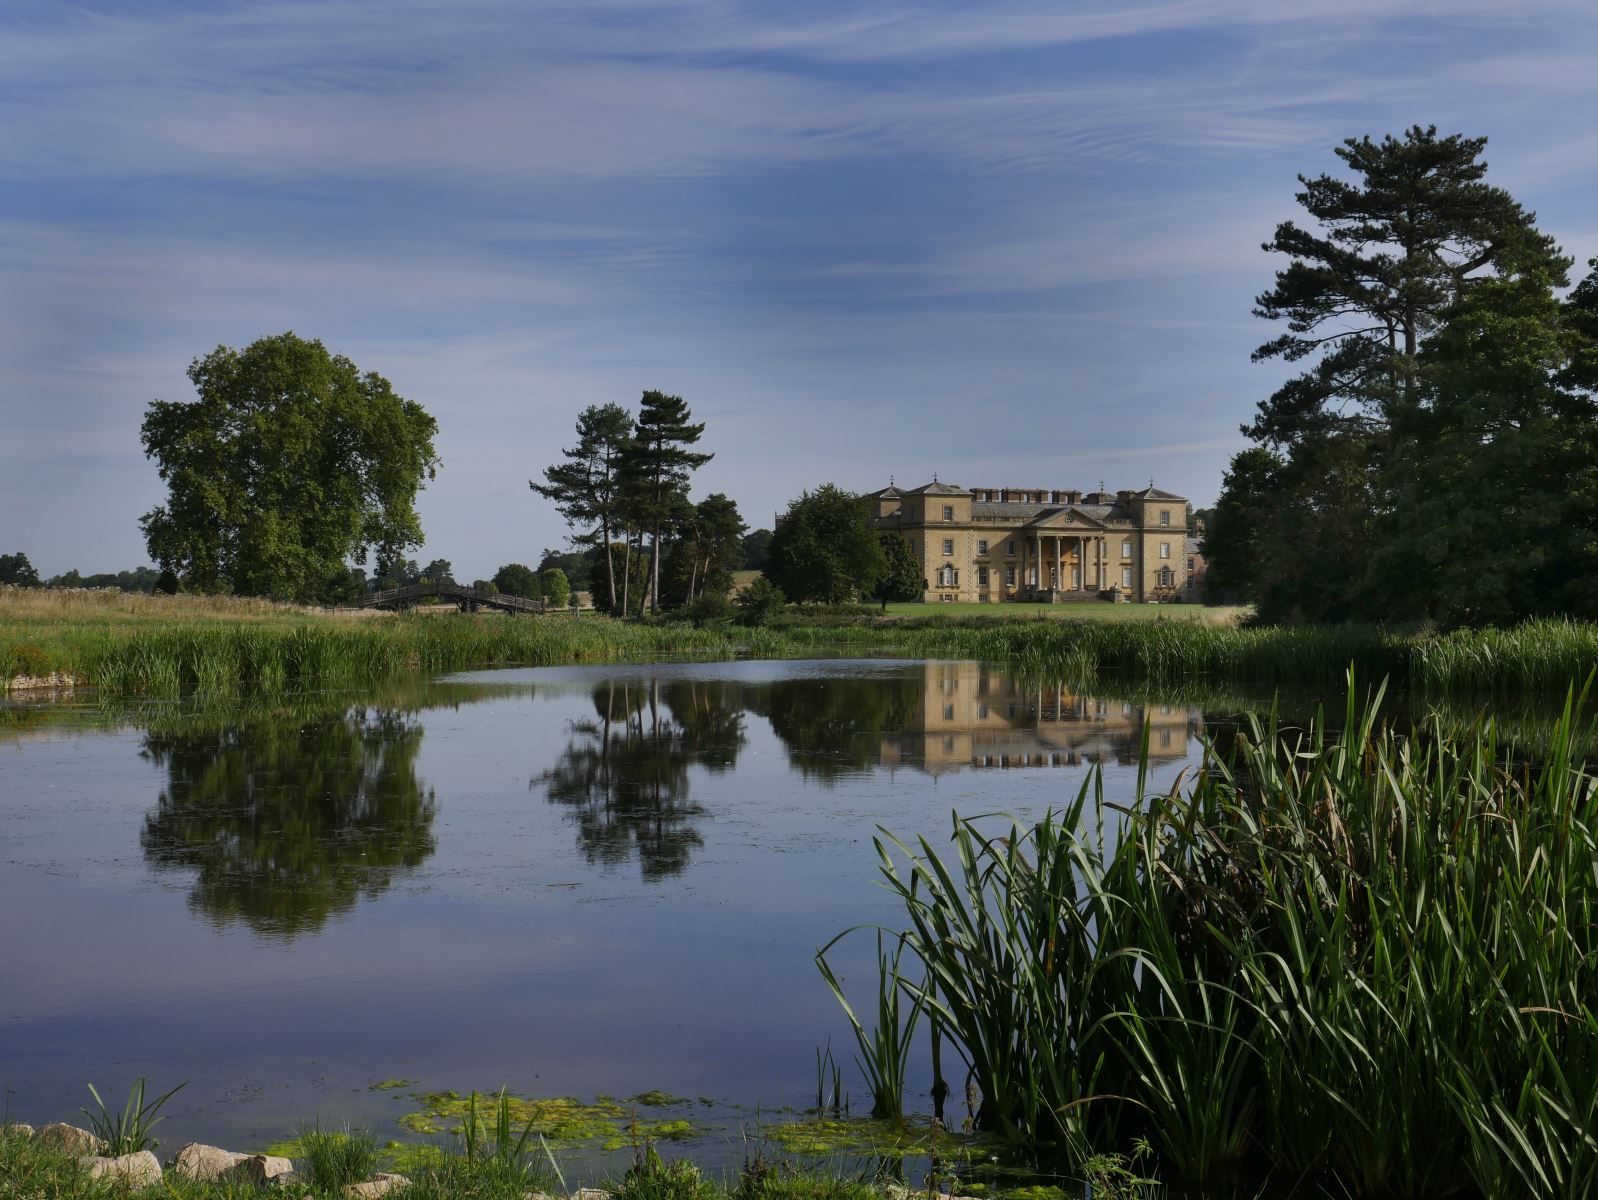 Croome © Tracey Blackwell